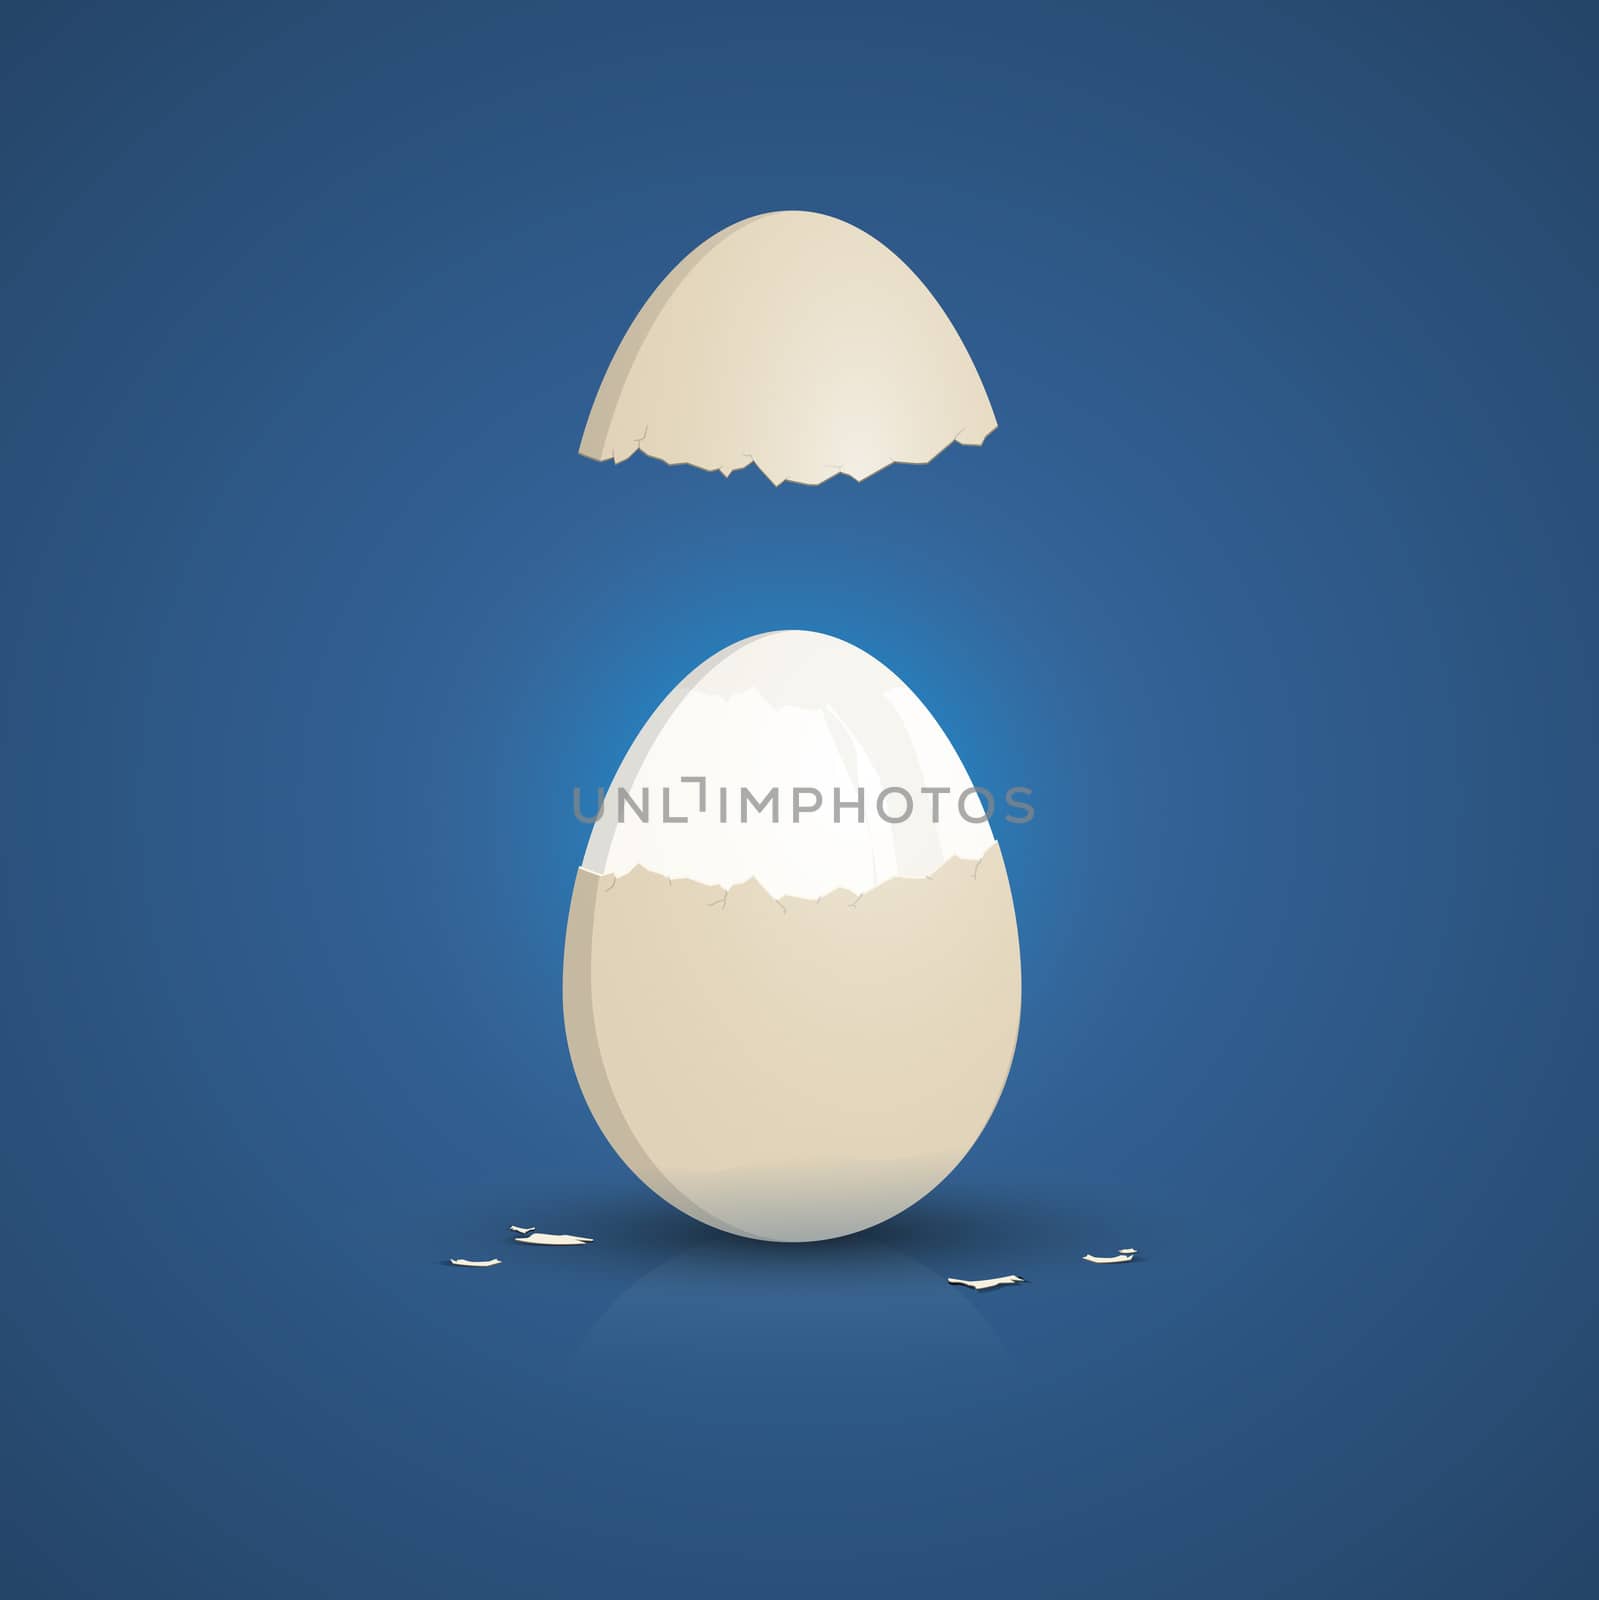 An illustration of a typical cooked white egg